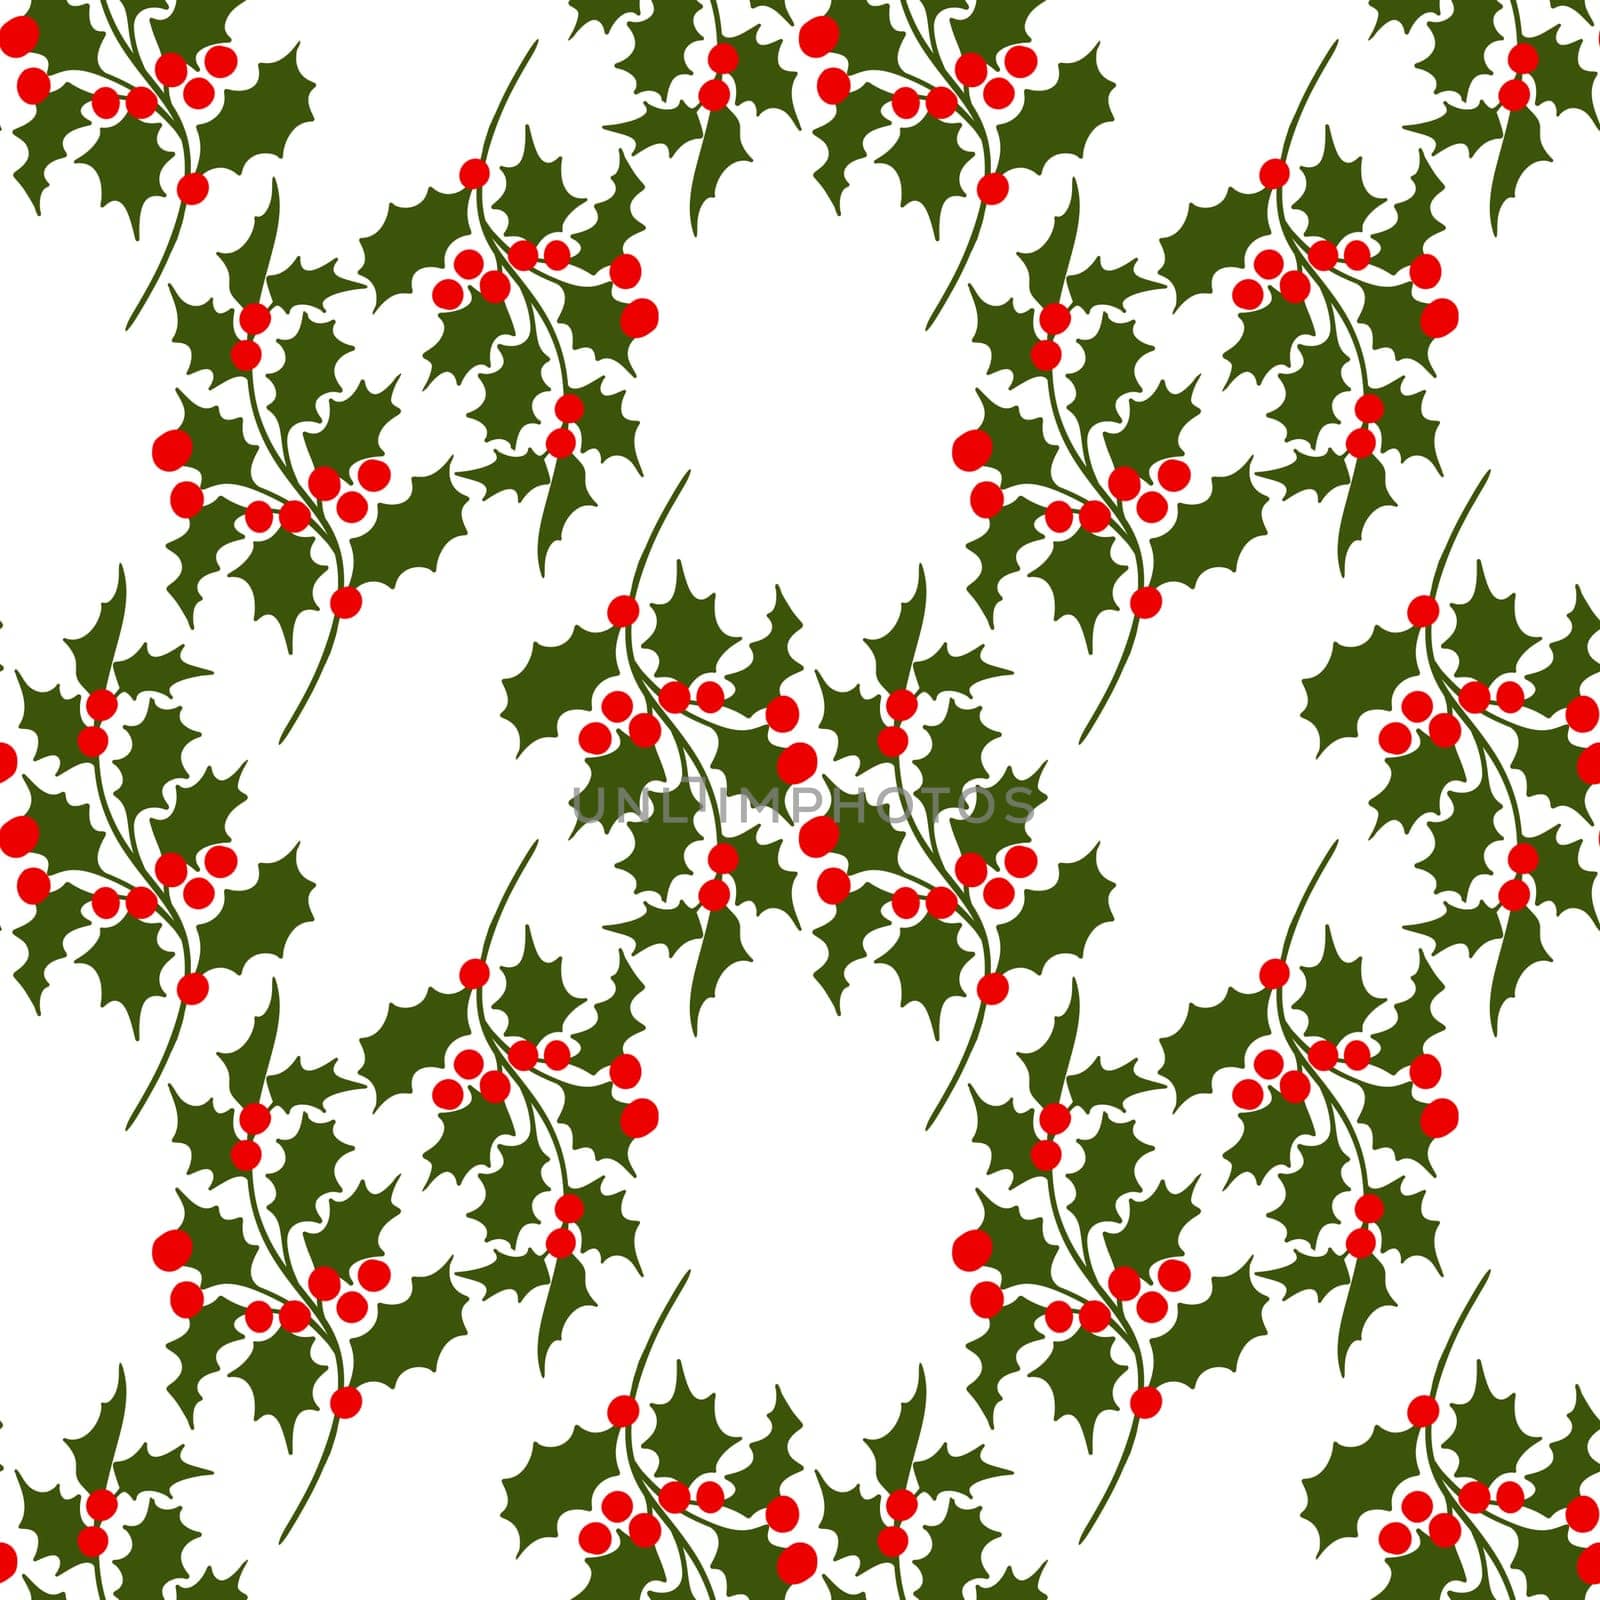 Hand drawn seamless pattern with Christmas winter elements in red green pink, traditional retro vintage holly holiday plant design on white background. Bright colorful print for celebration. by Lagmar